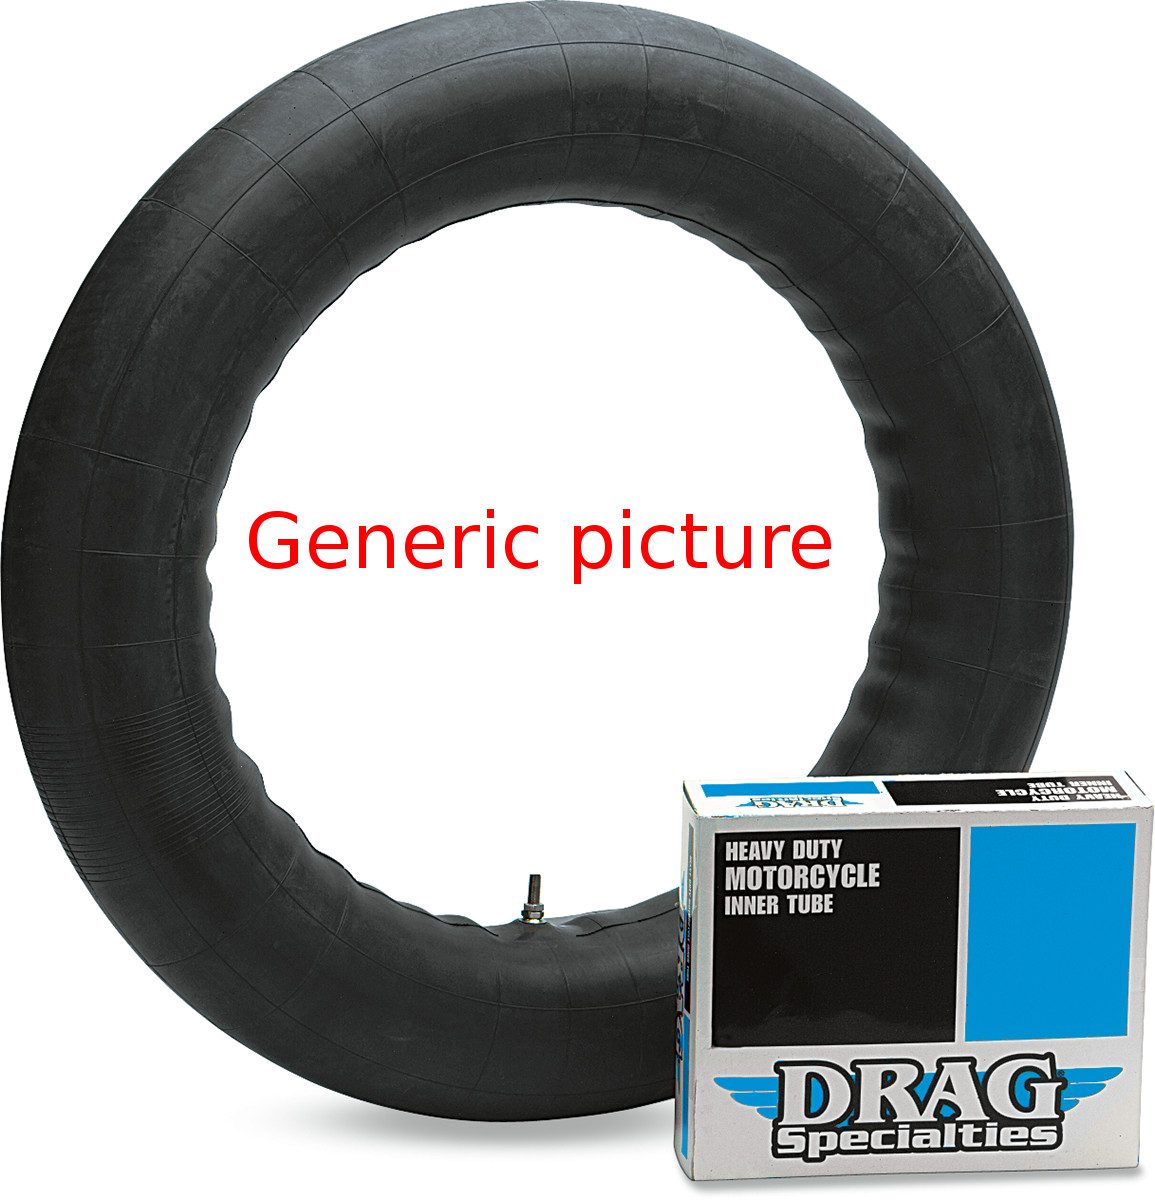 Heavy Duty Inner Tube 150/80-16 Side Metal Valve - Click Image to Close